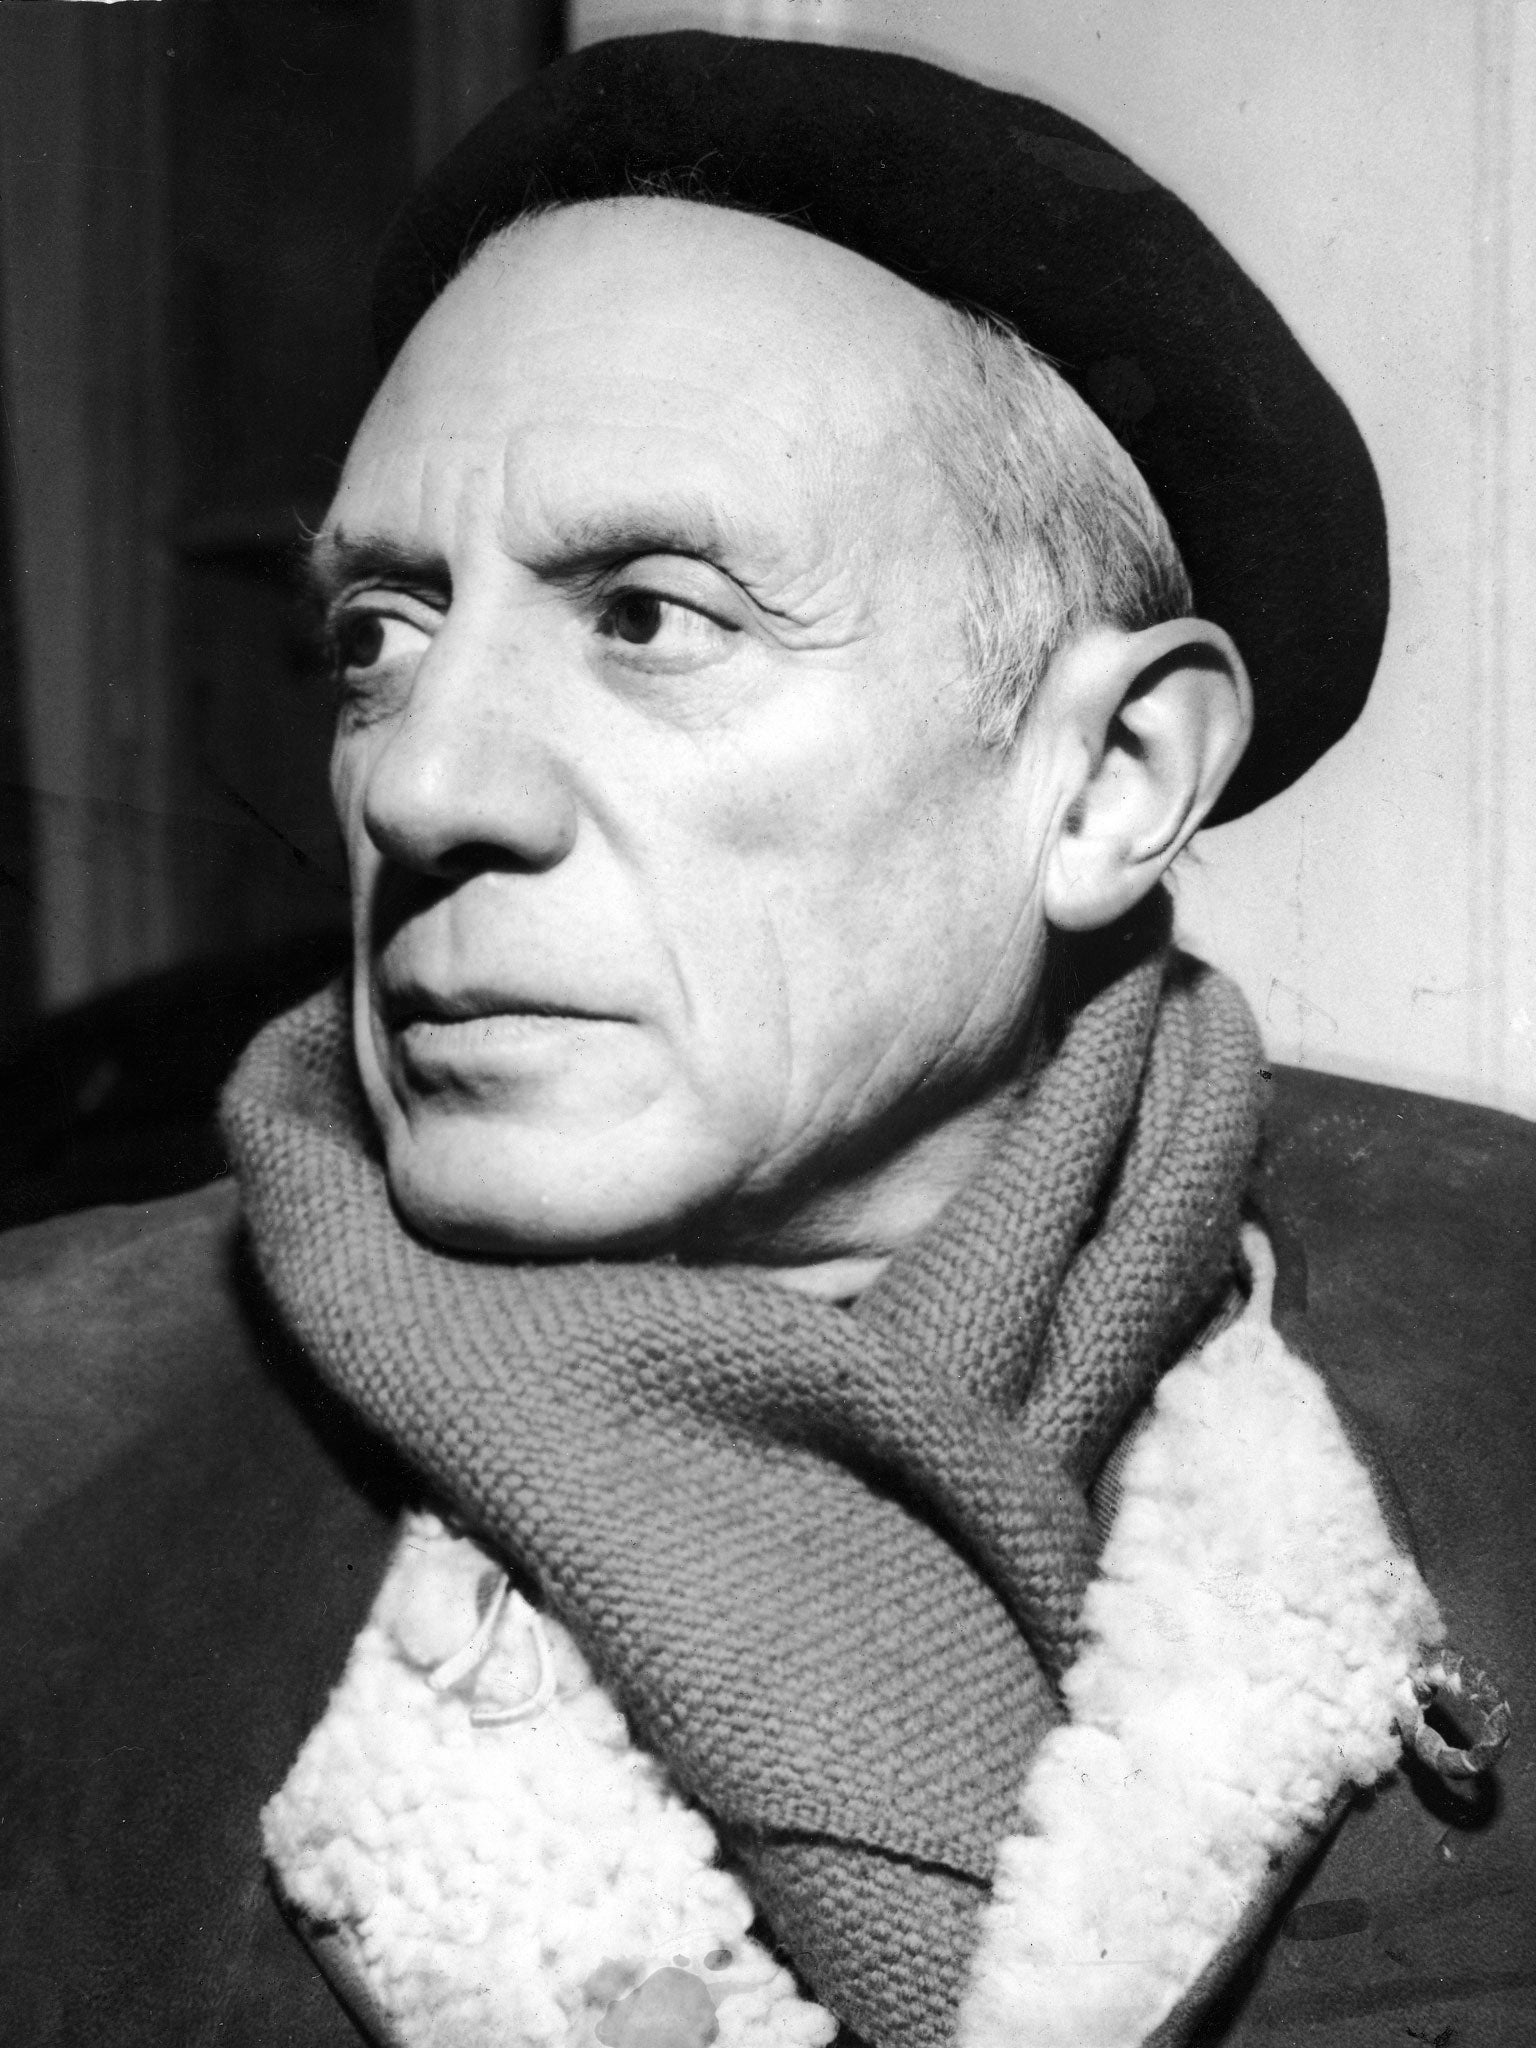 Portrait of Spanish-born artist Pablo Picasso (1881 - 1973) in a winter coat, scarf, and beret, 1950s